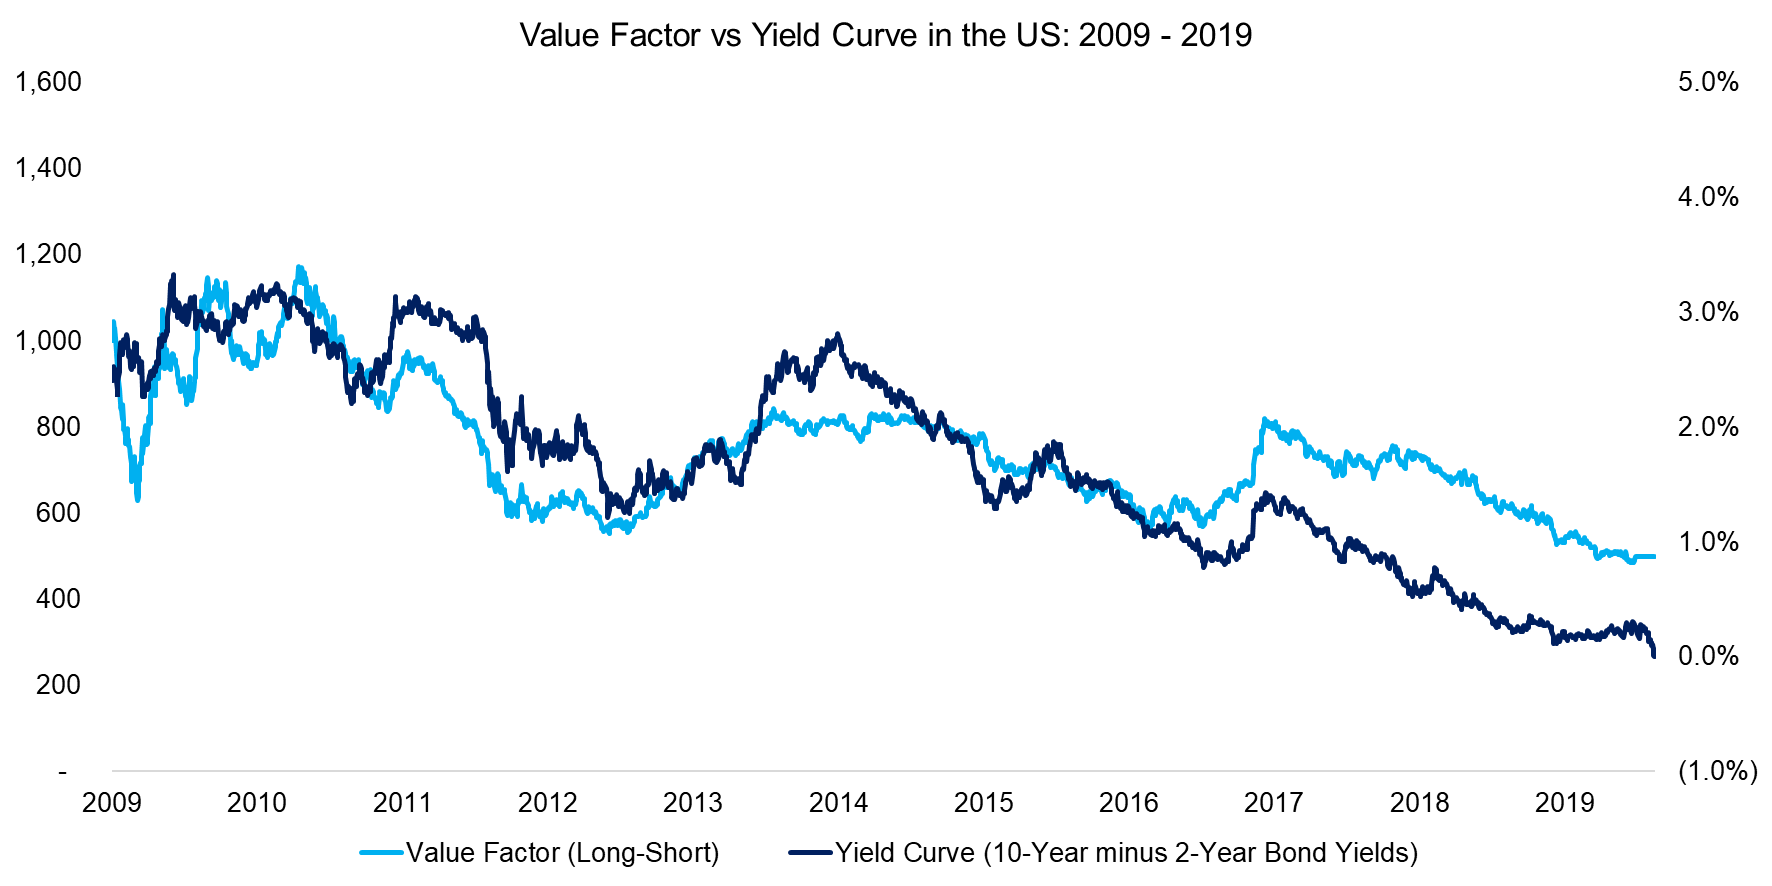 Value Factor vs Yield Curve in the US 2009 - 2019